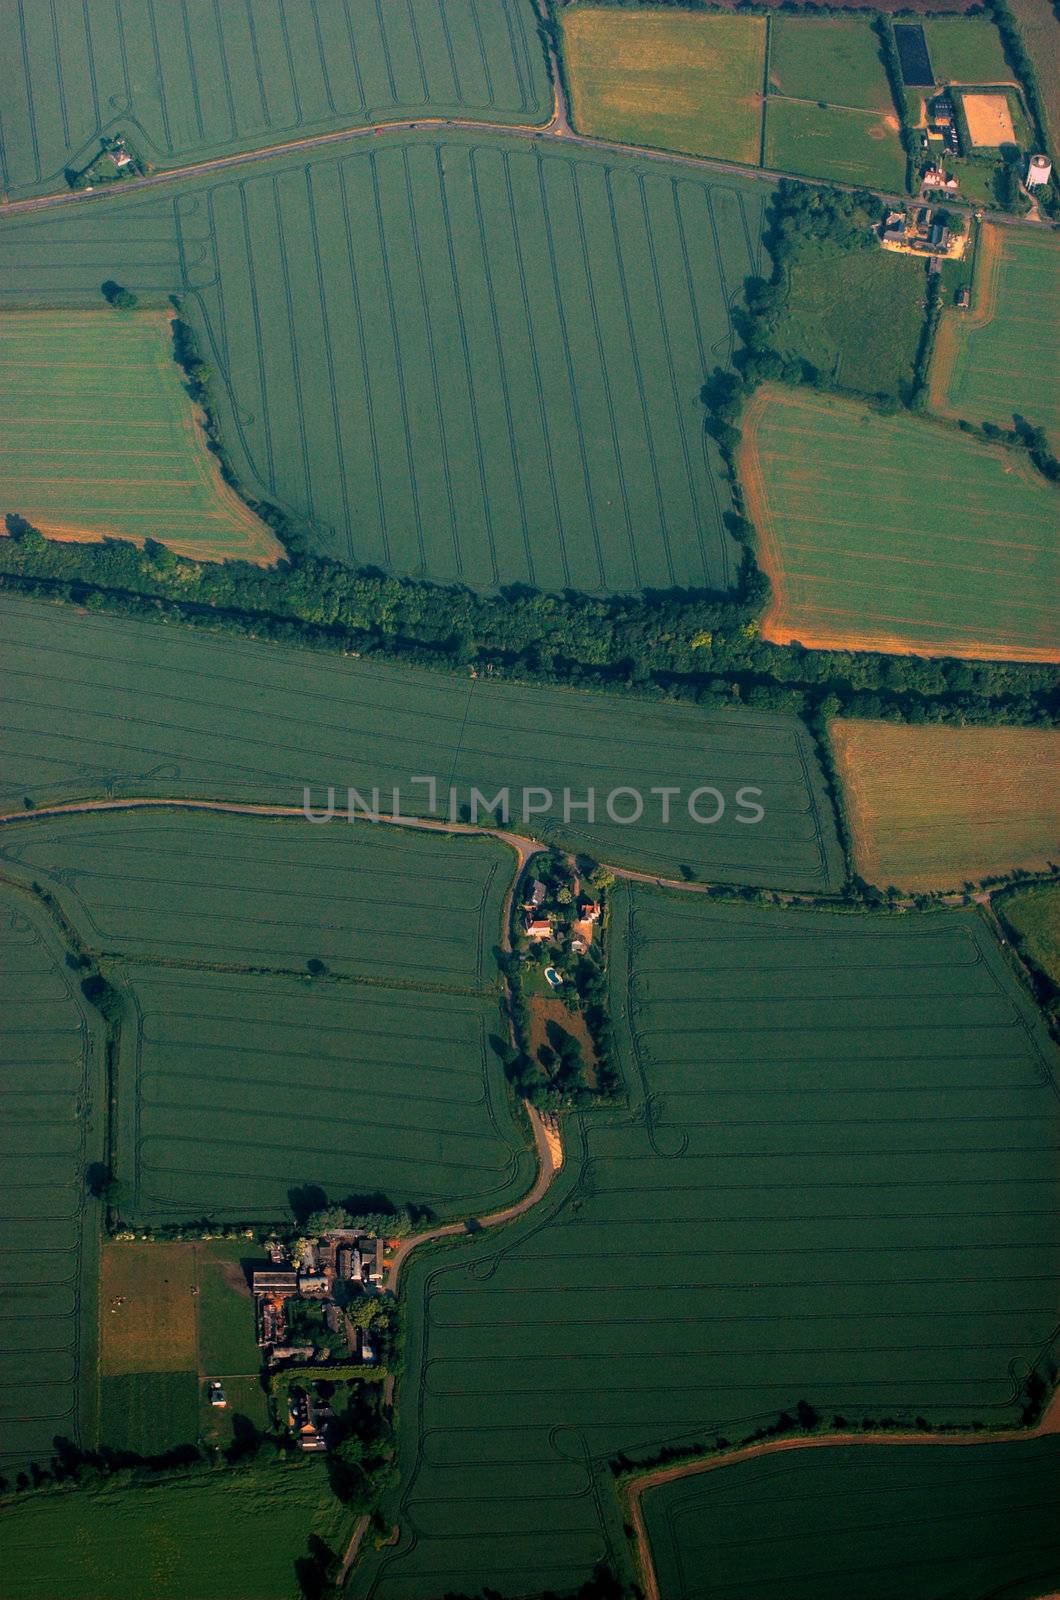 british landscape from the air